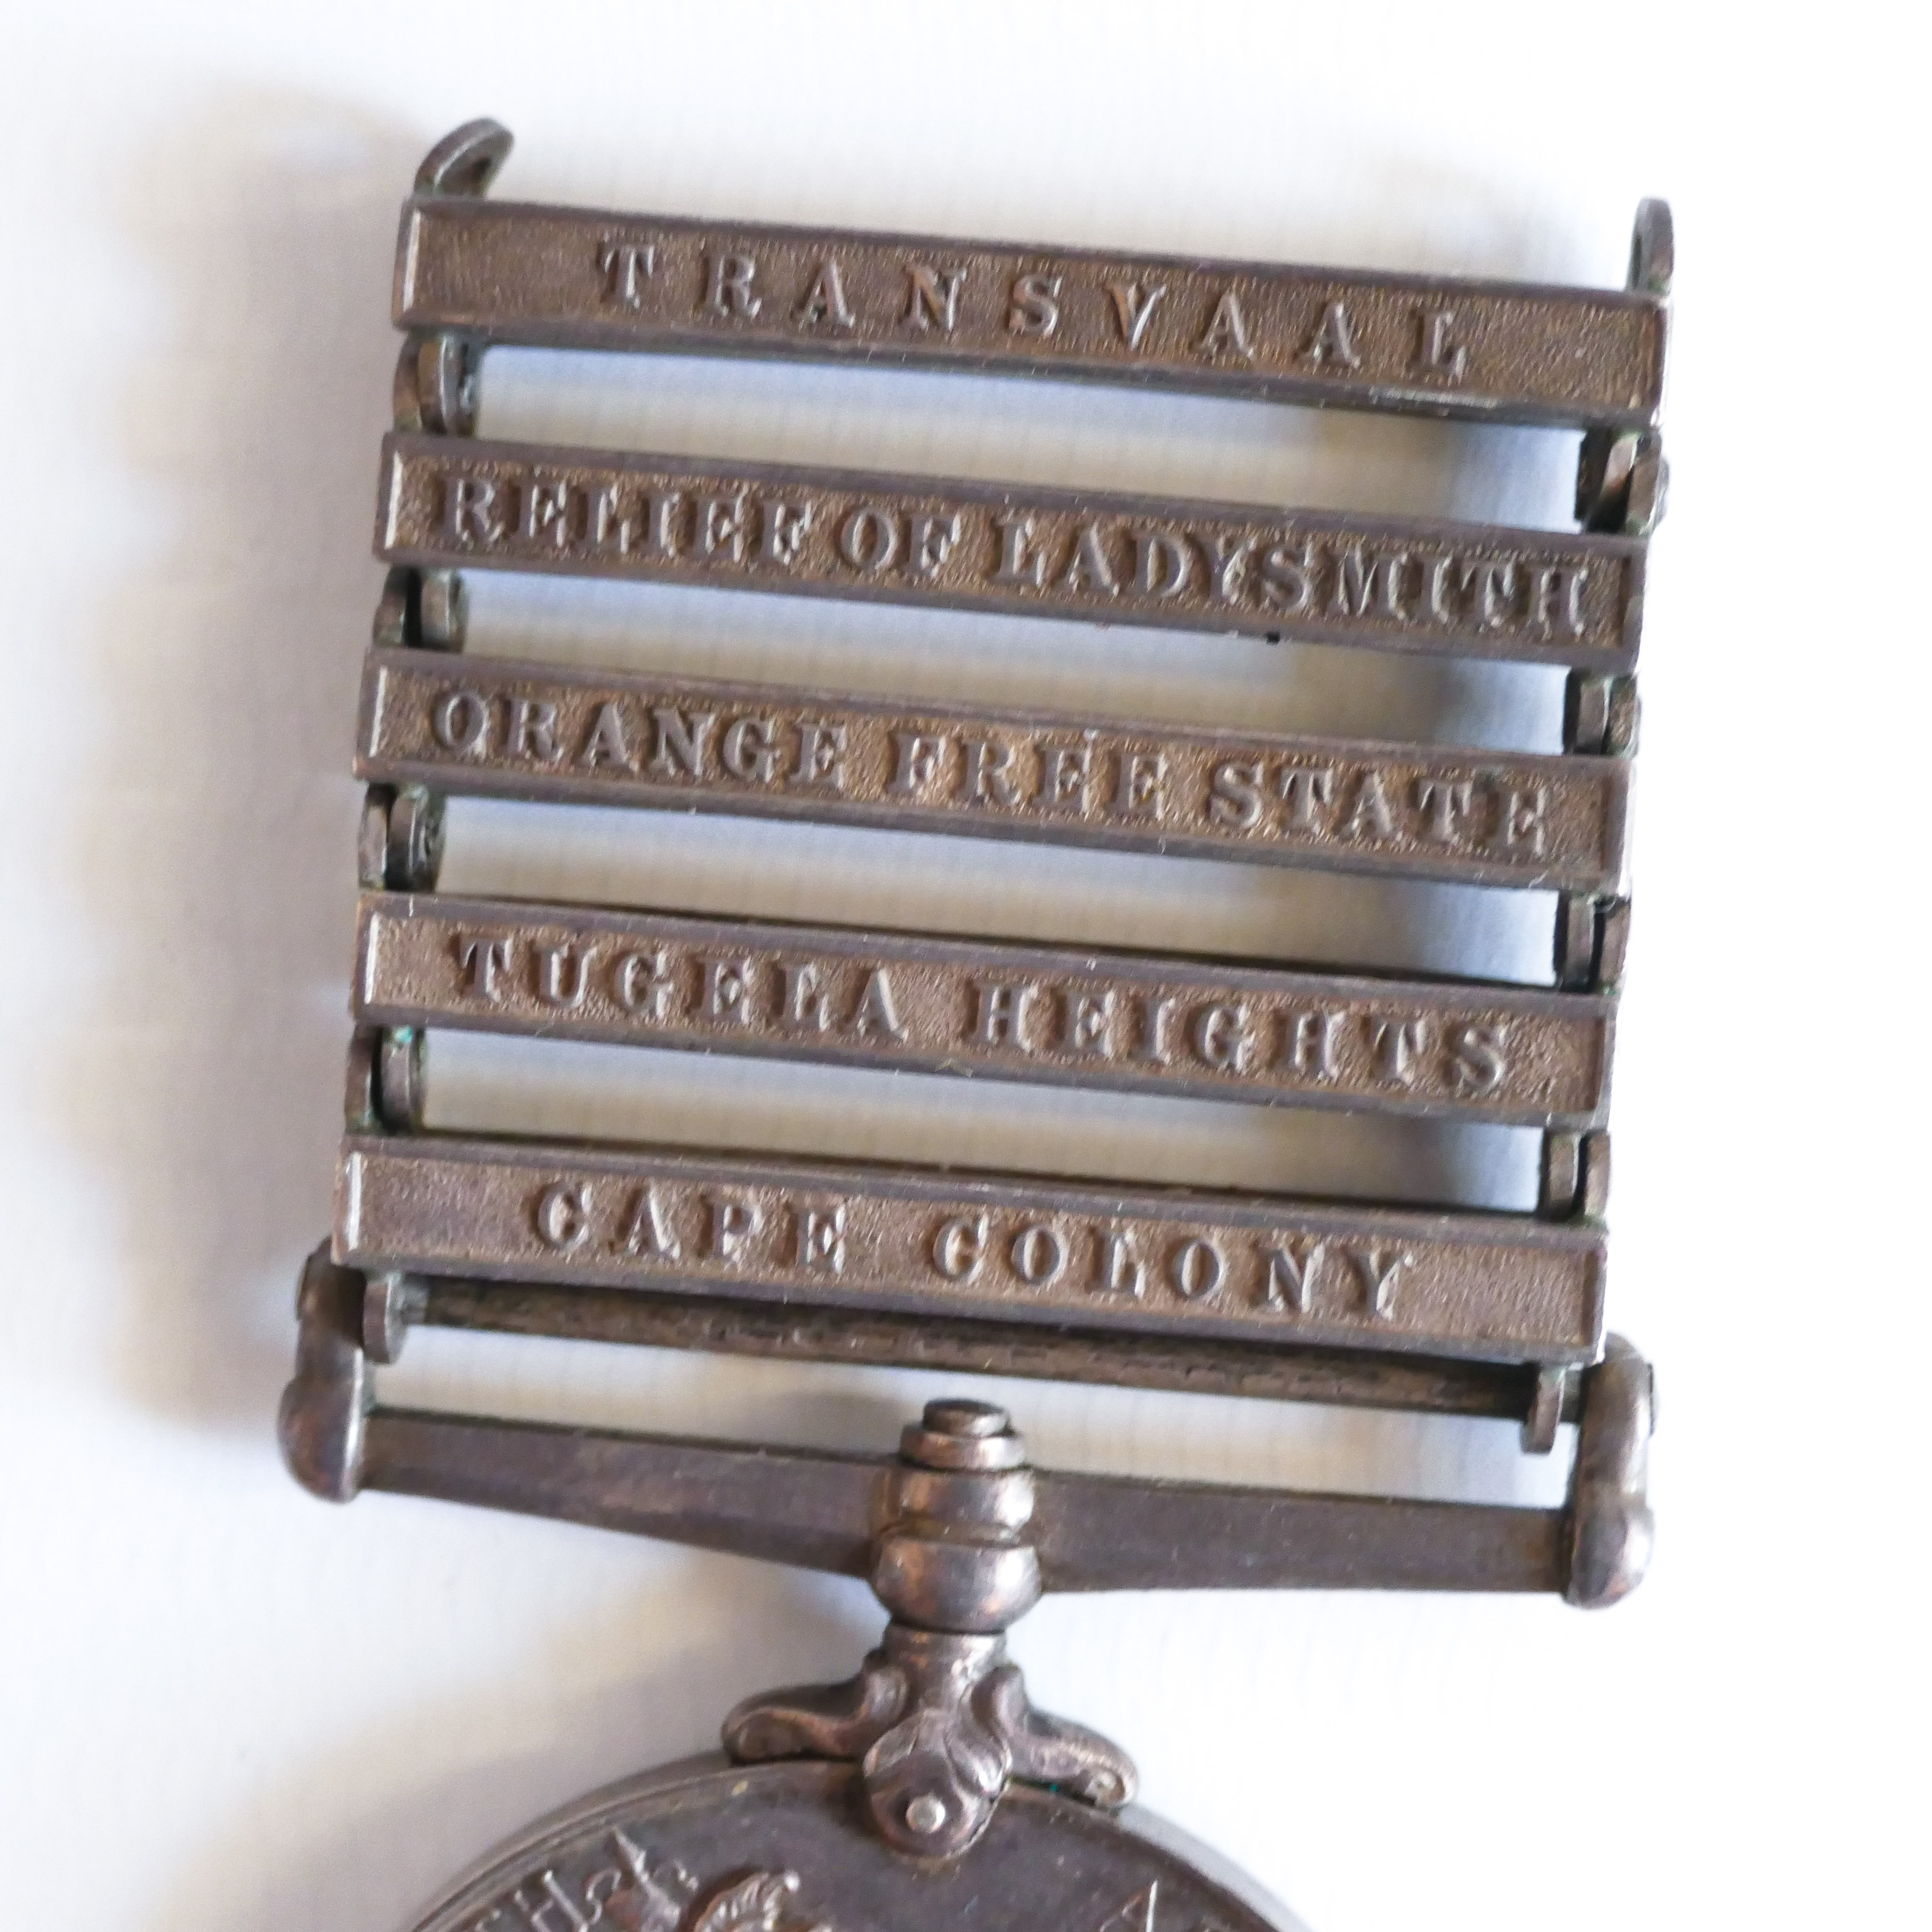 BRITISH EMPIRE BOER WAR MEDAL FIVE CLASPS SOUTH AFRICA QUEEN VICTORIA HISTORICAL MILITARY - Image 3 of 5